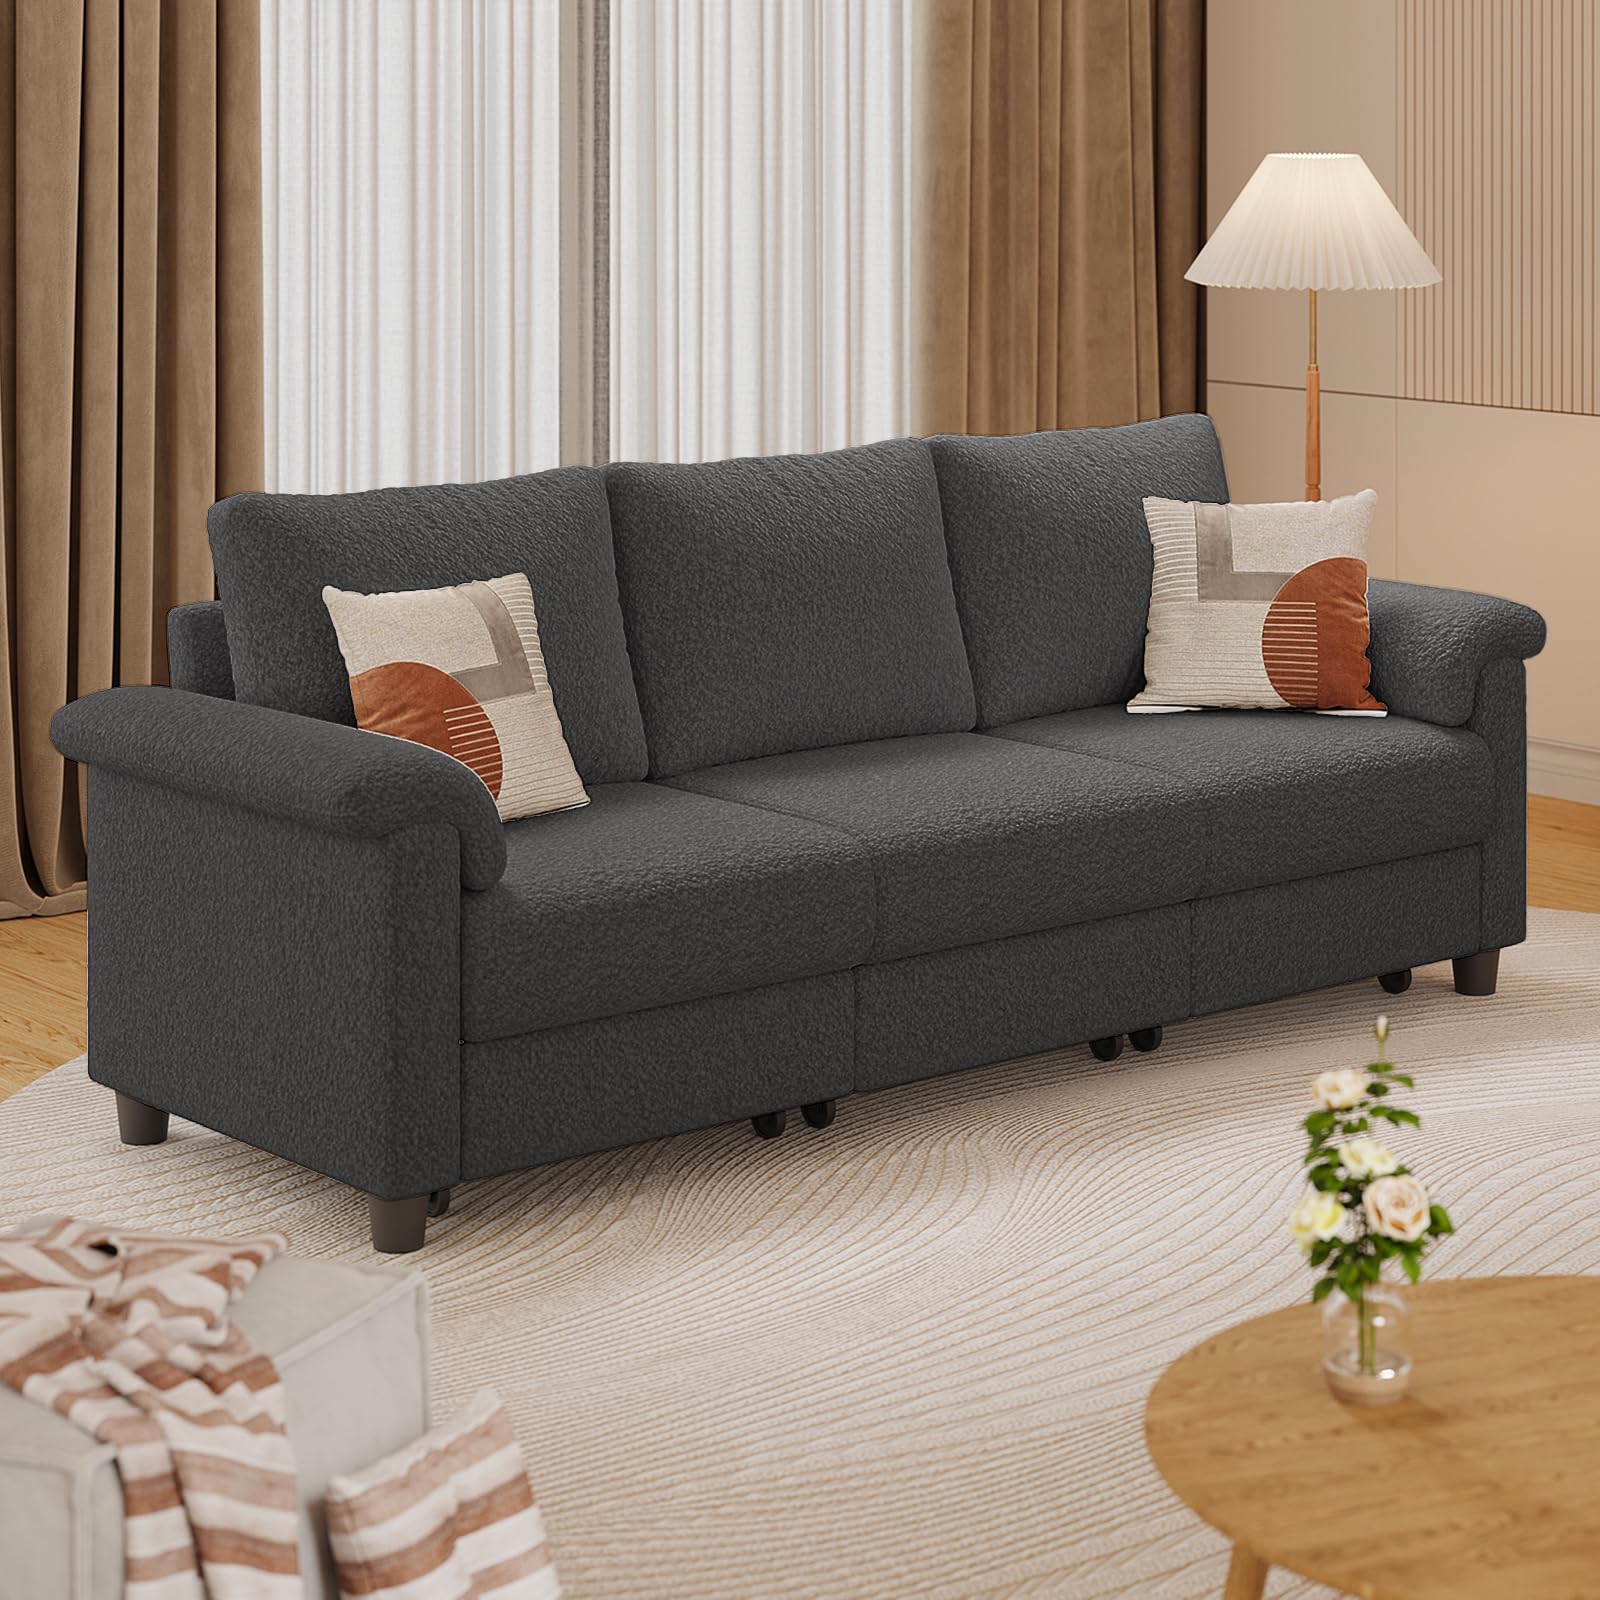 Gizoon AR81 79" Mohair Modern 3 Seater Sofa with 3 Drawers